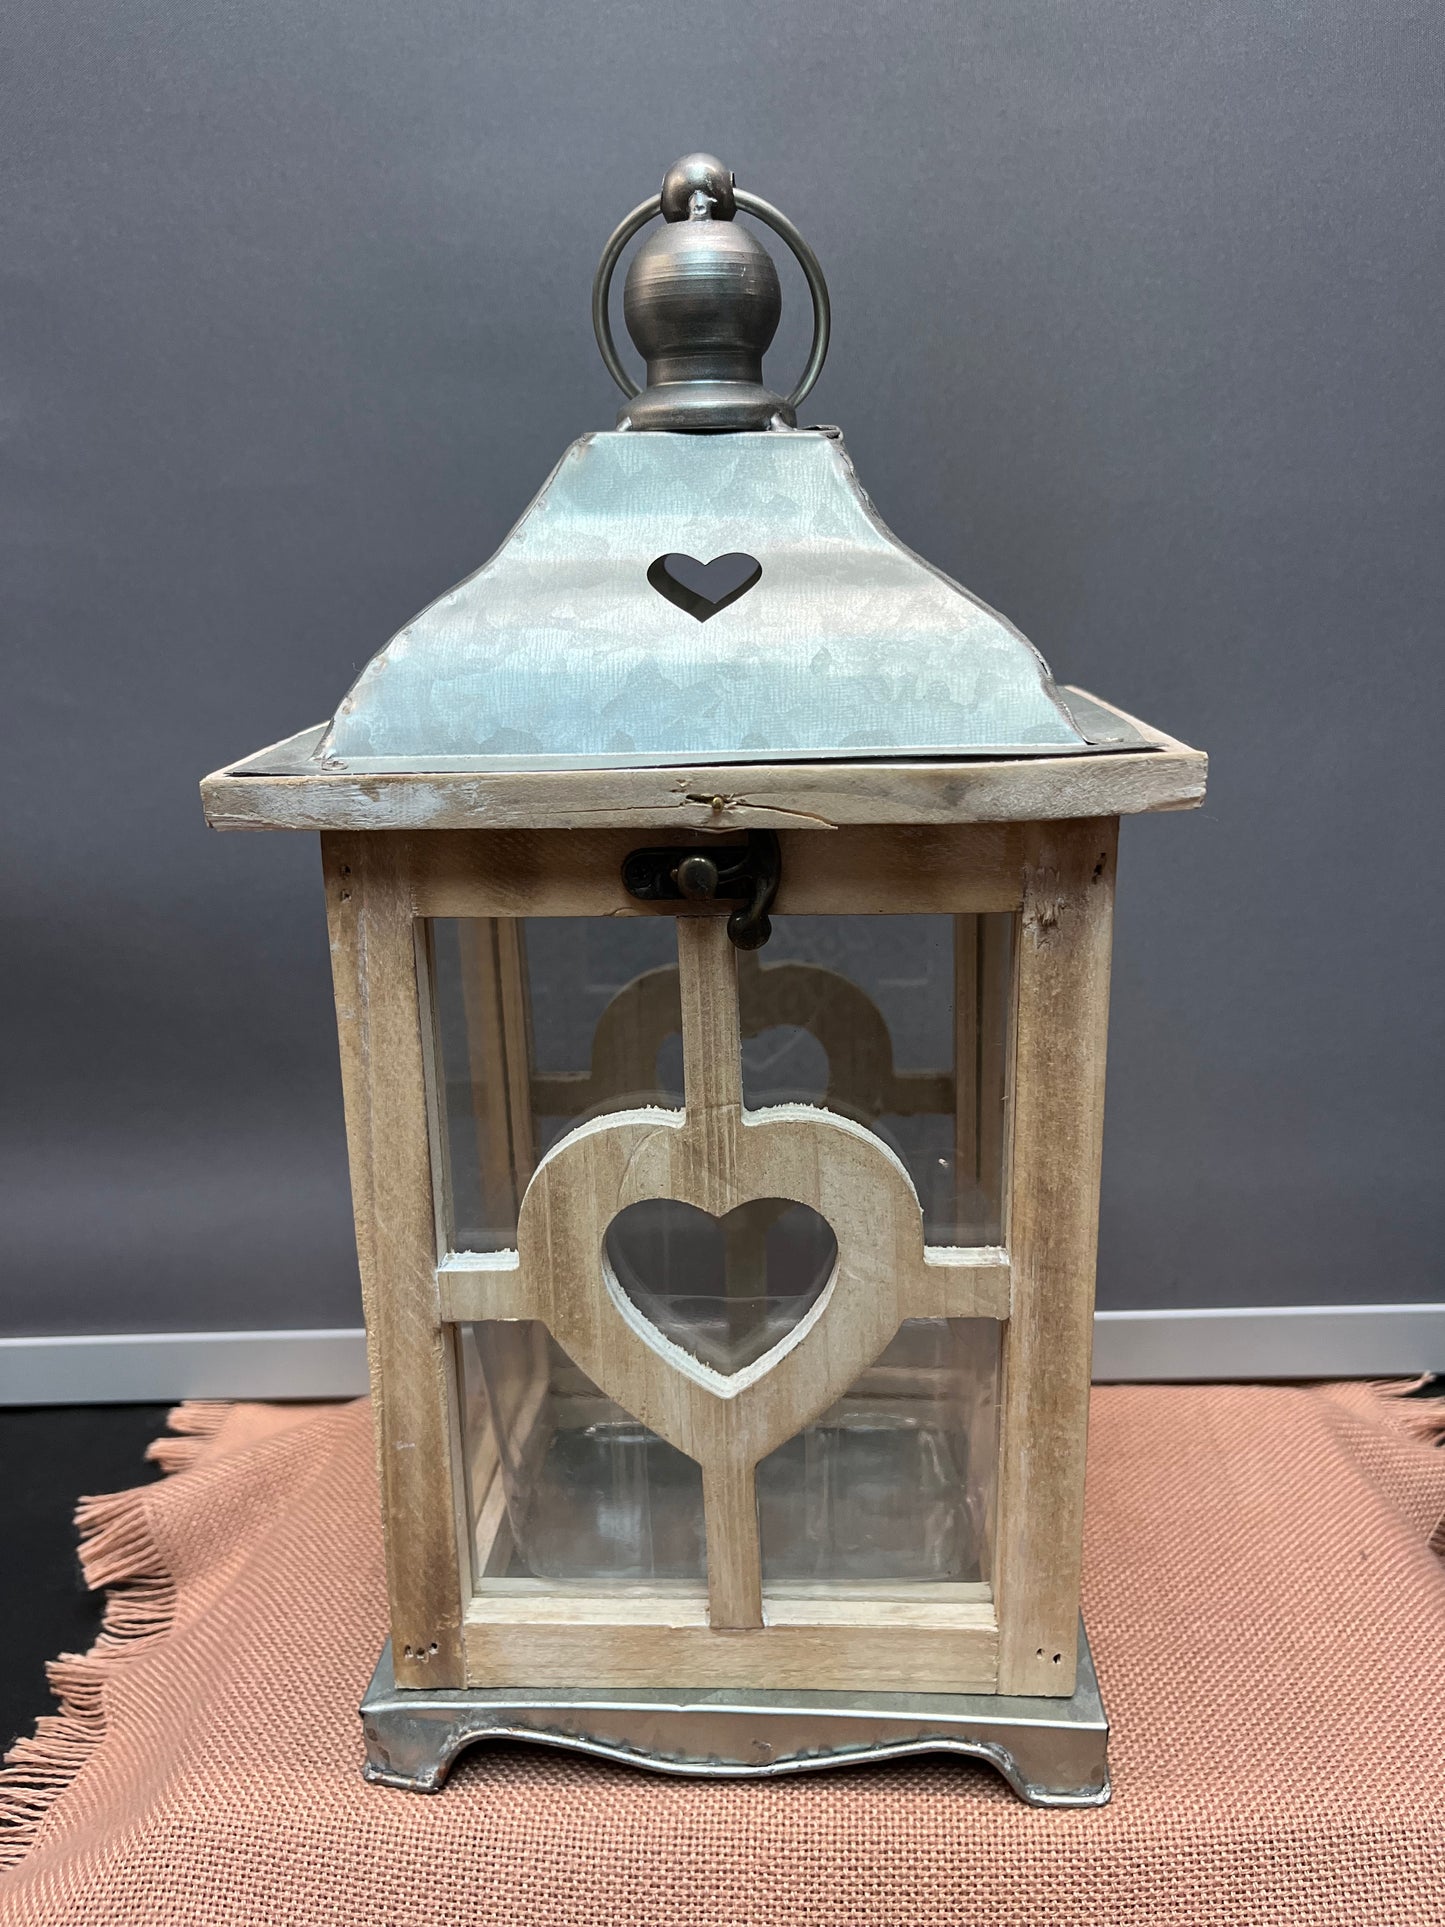 Small lantern with heart